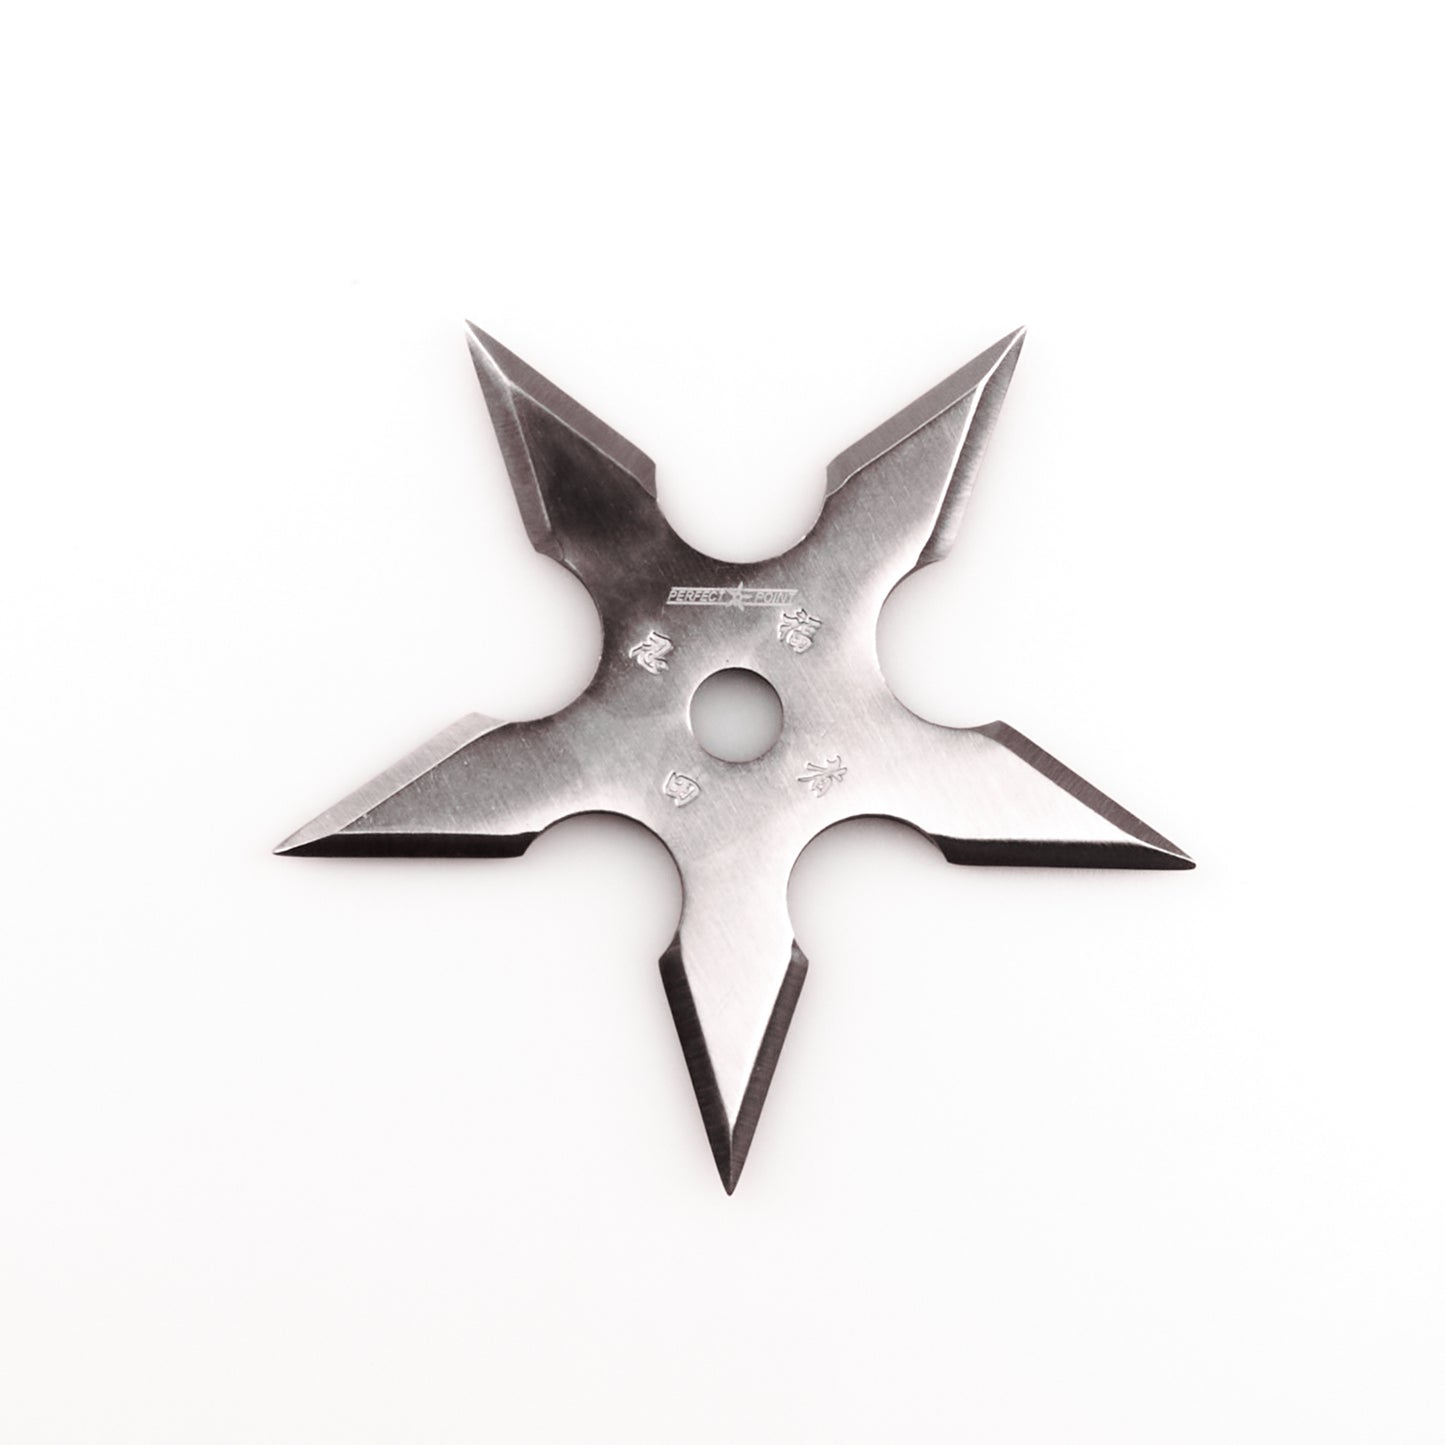 Stainless Steel 5 Points Throwing Star Set